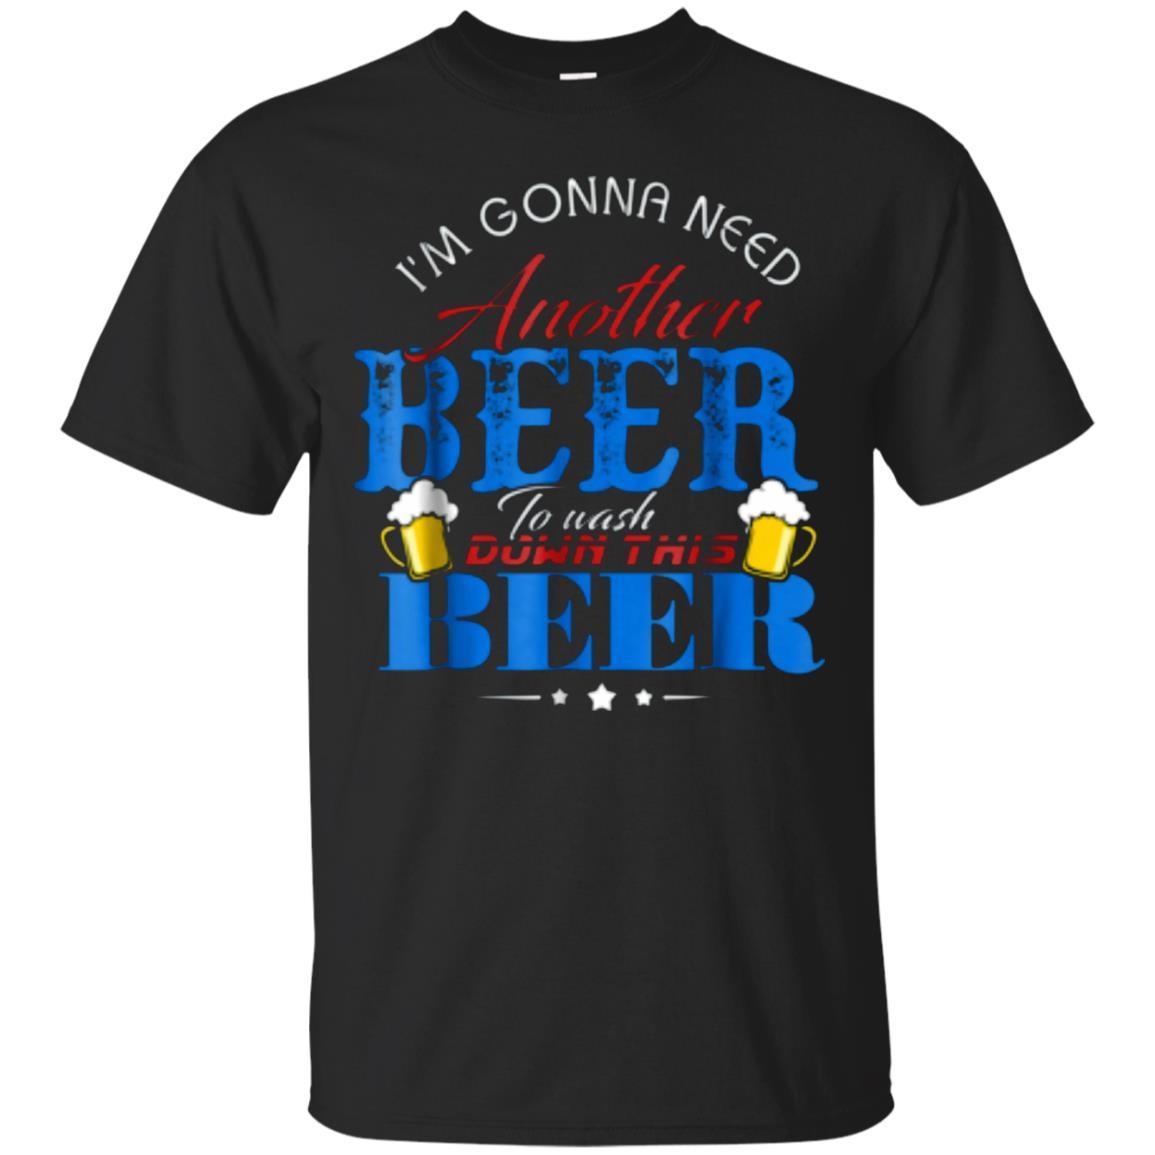 I'm Gonna Need Another Beer To Wash Down This Beer Shirt Tee T-shirt ...